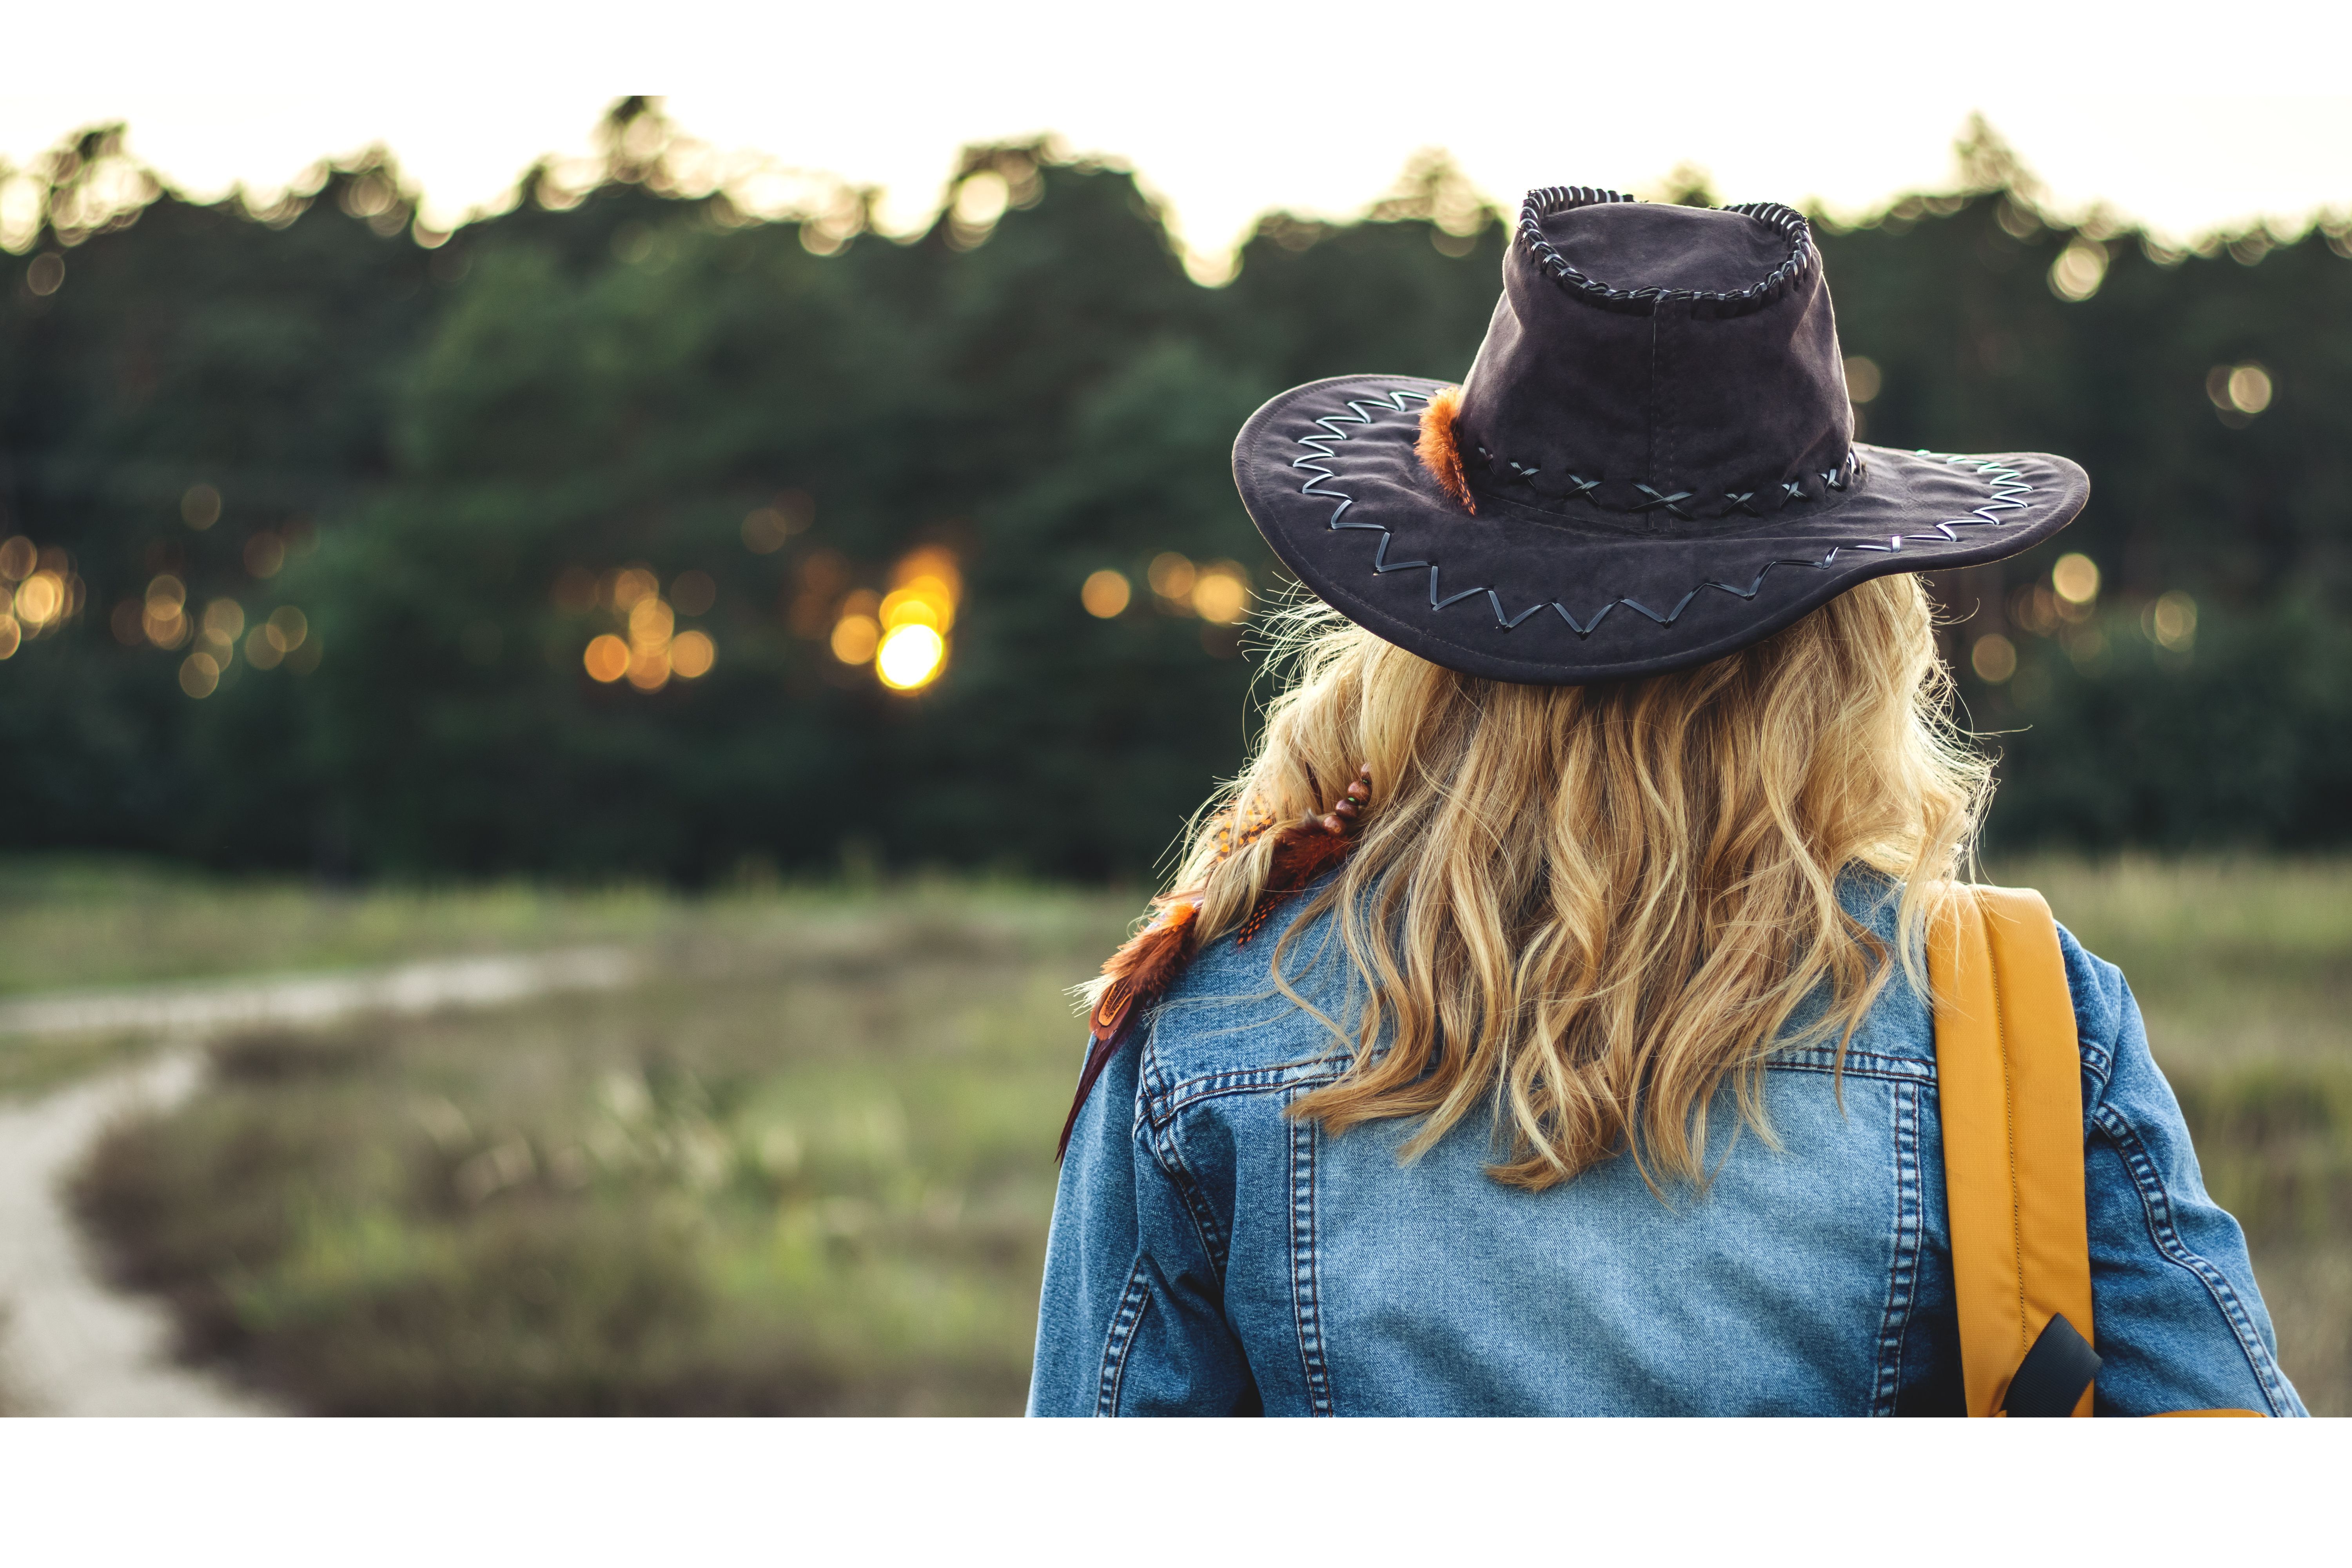 Woman tourist with hat and backpack hiking on footpath in nature during sunset. Rear view of blond hair female tourist wearing denim jacket is walking outdoors.